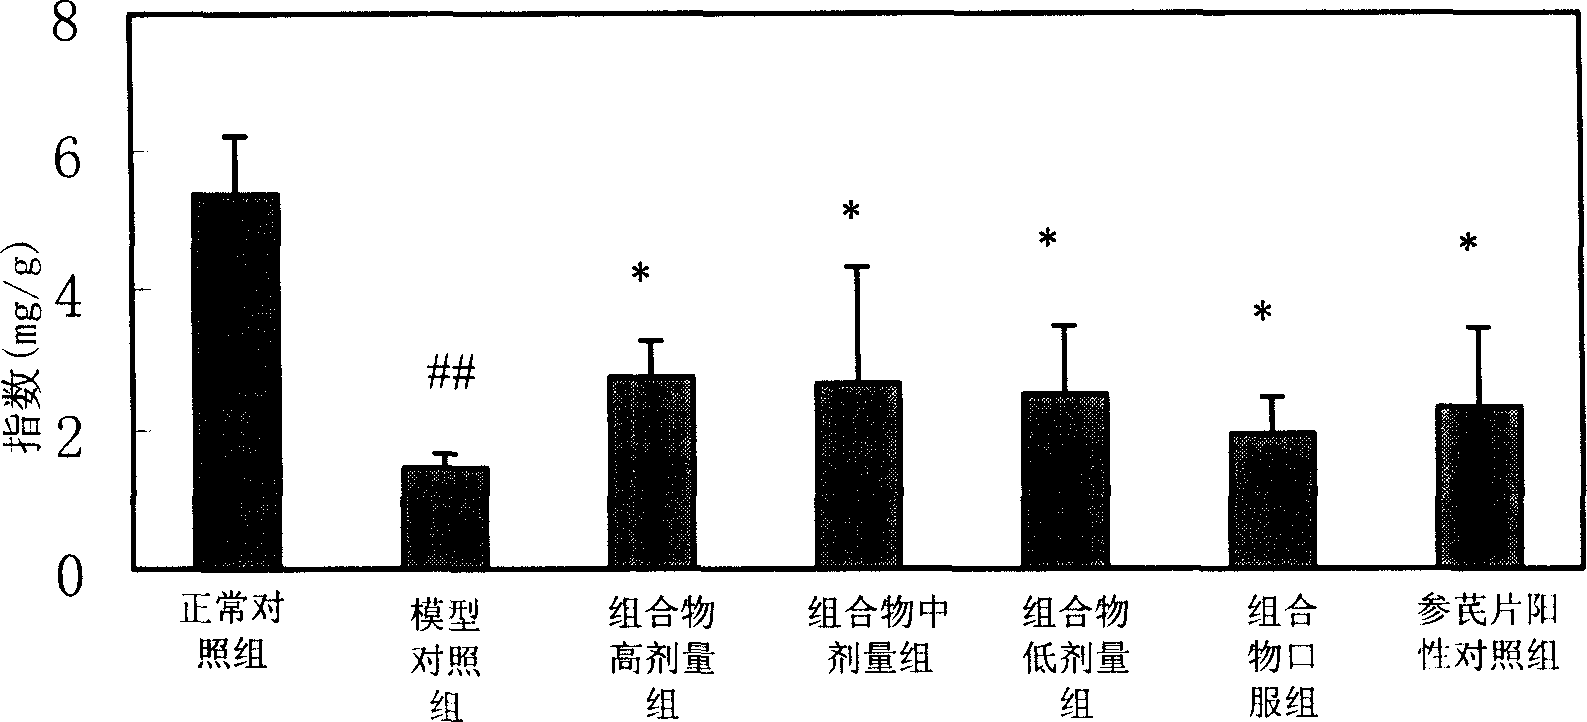 Composition of paeoniflorin and peony lactone glycoside with function of increasing leukocyte